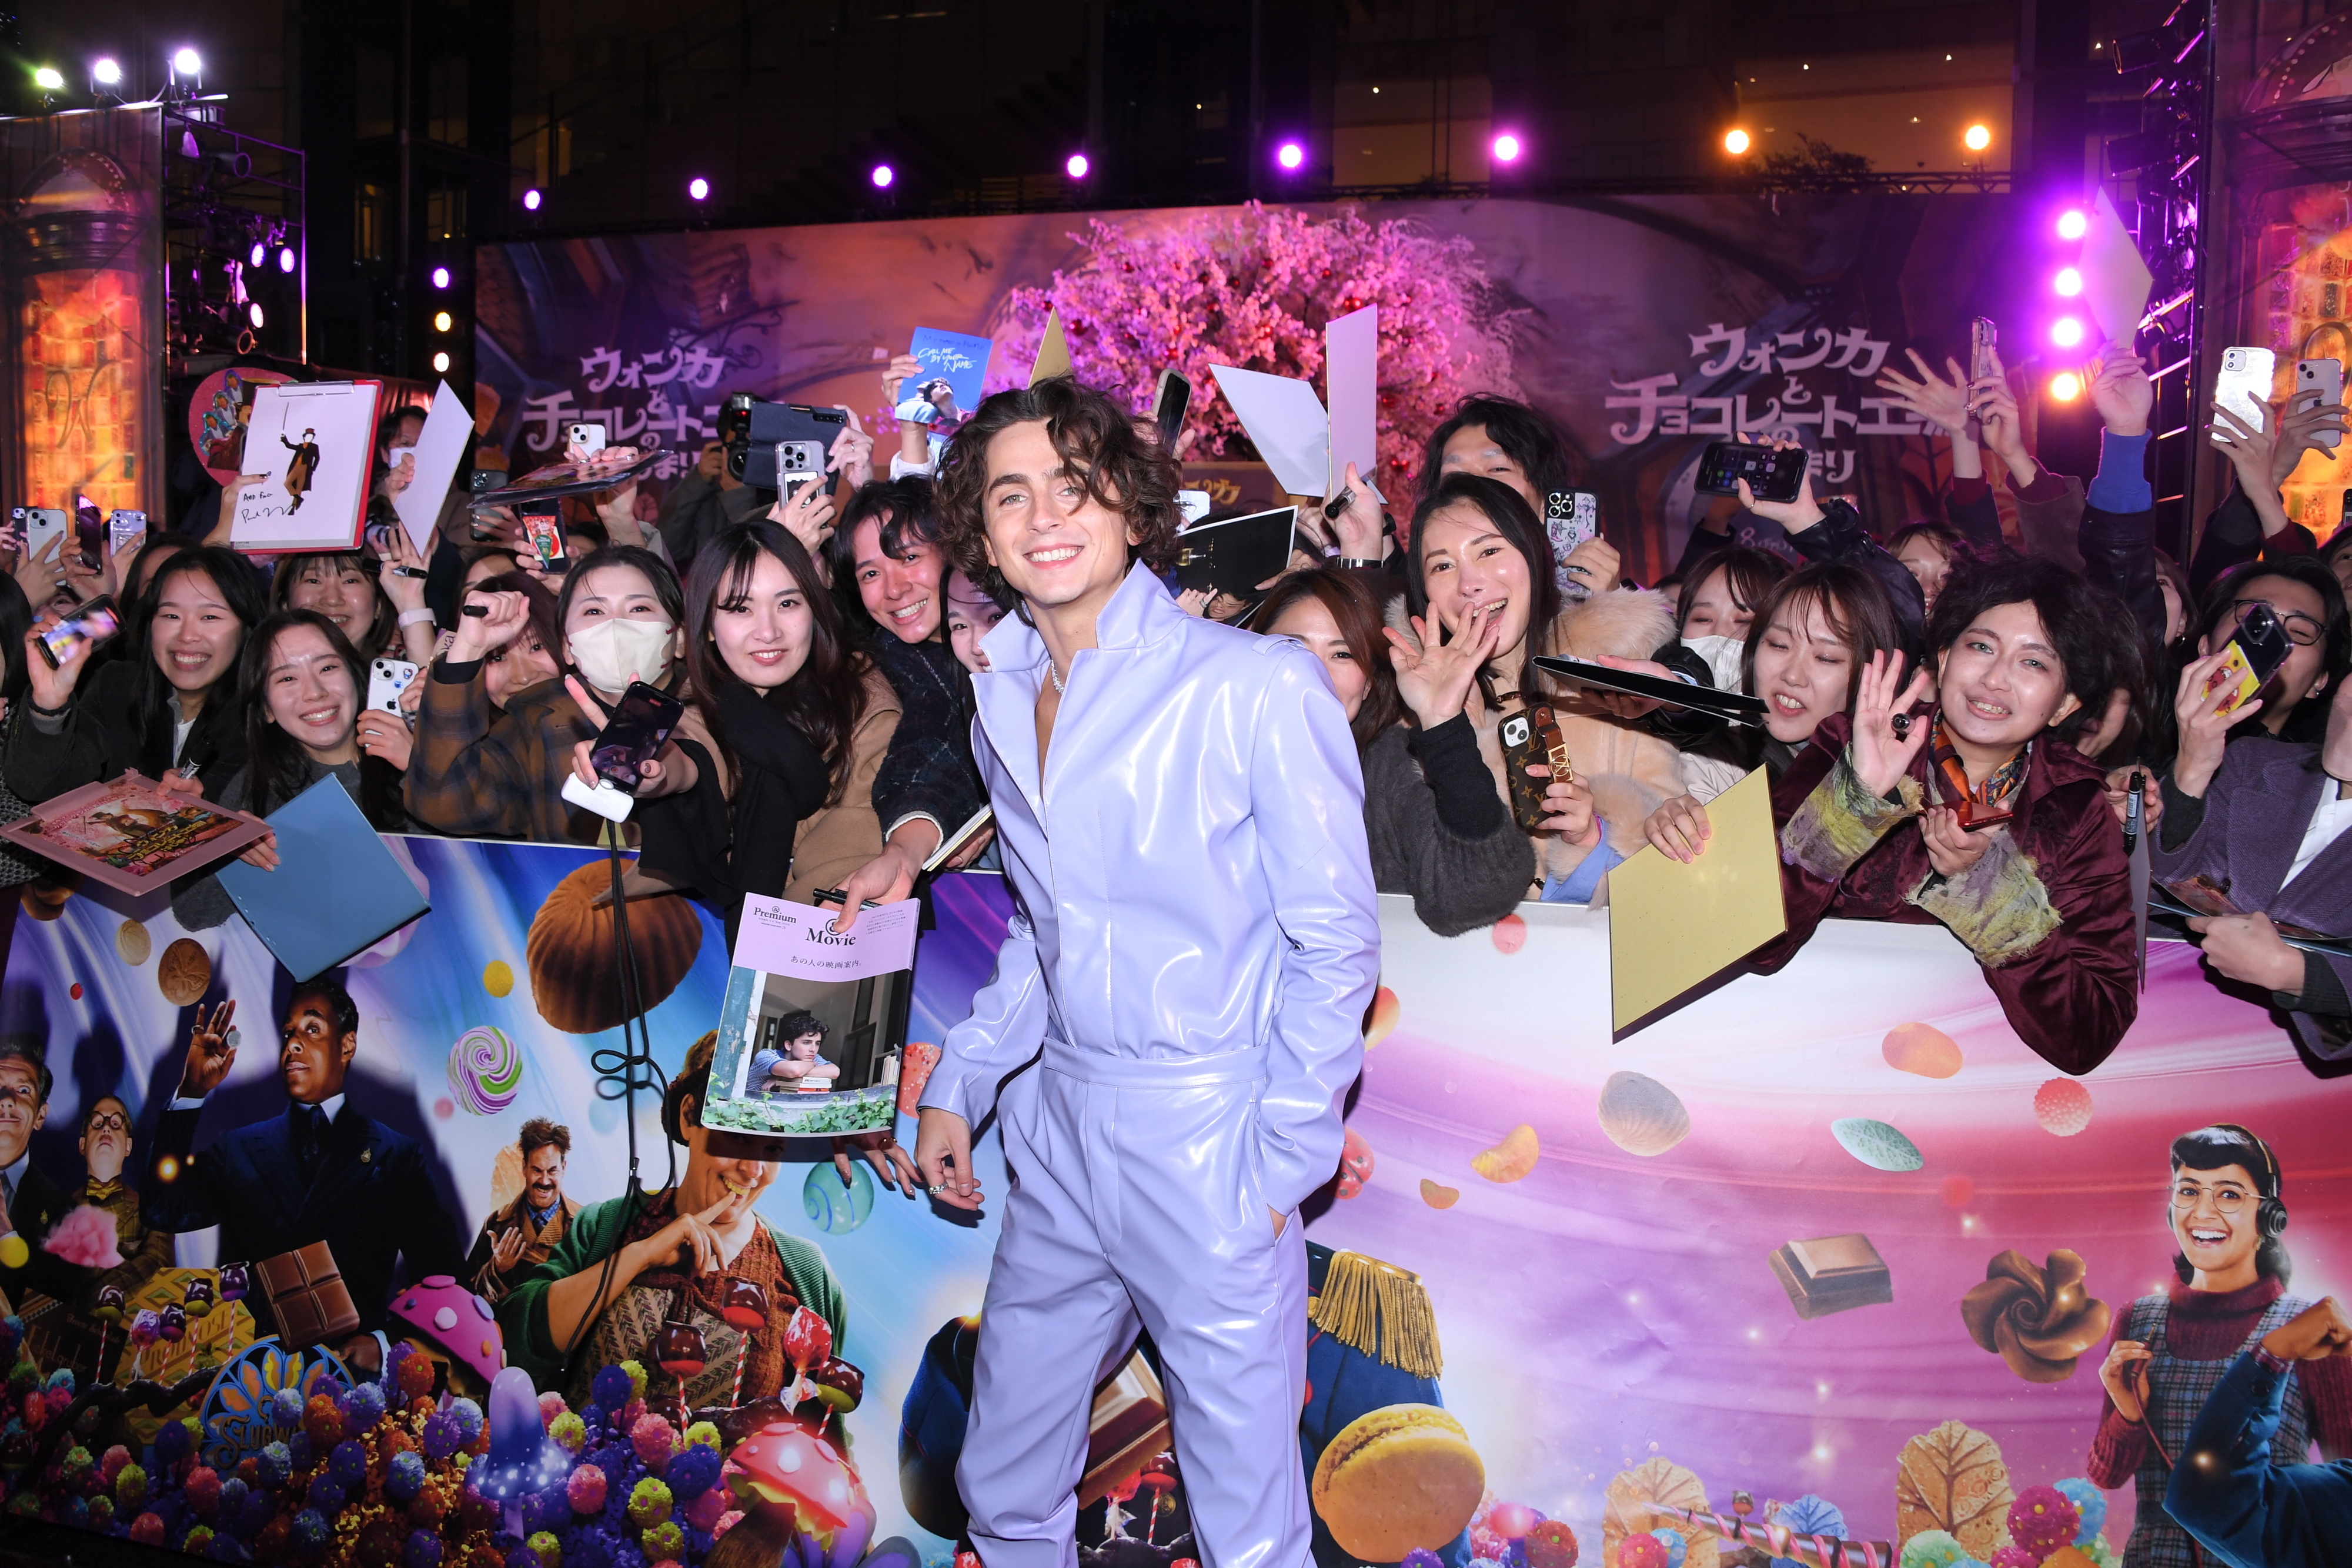 Timmy in a lavender plasticky suit in front of fans